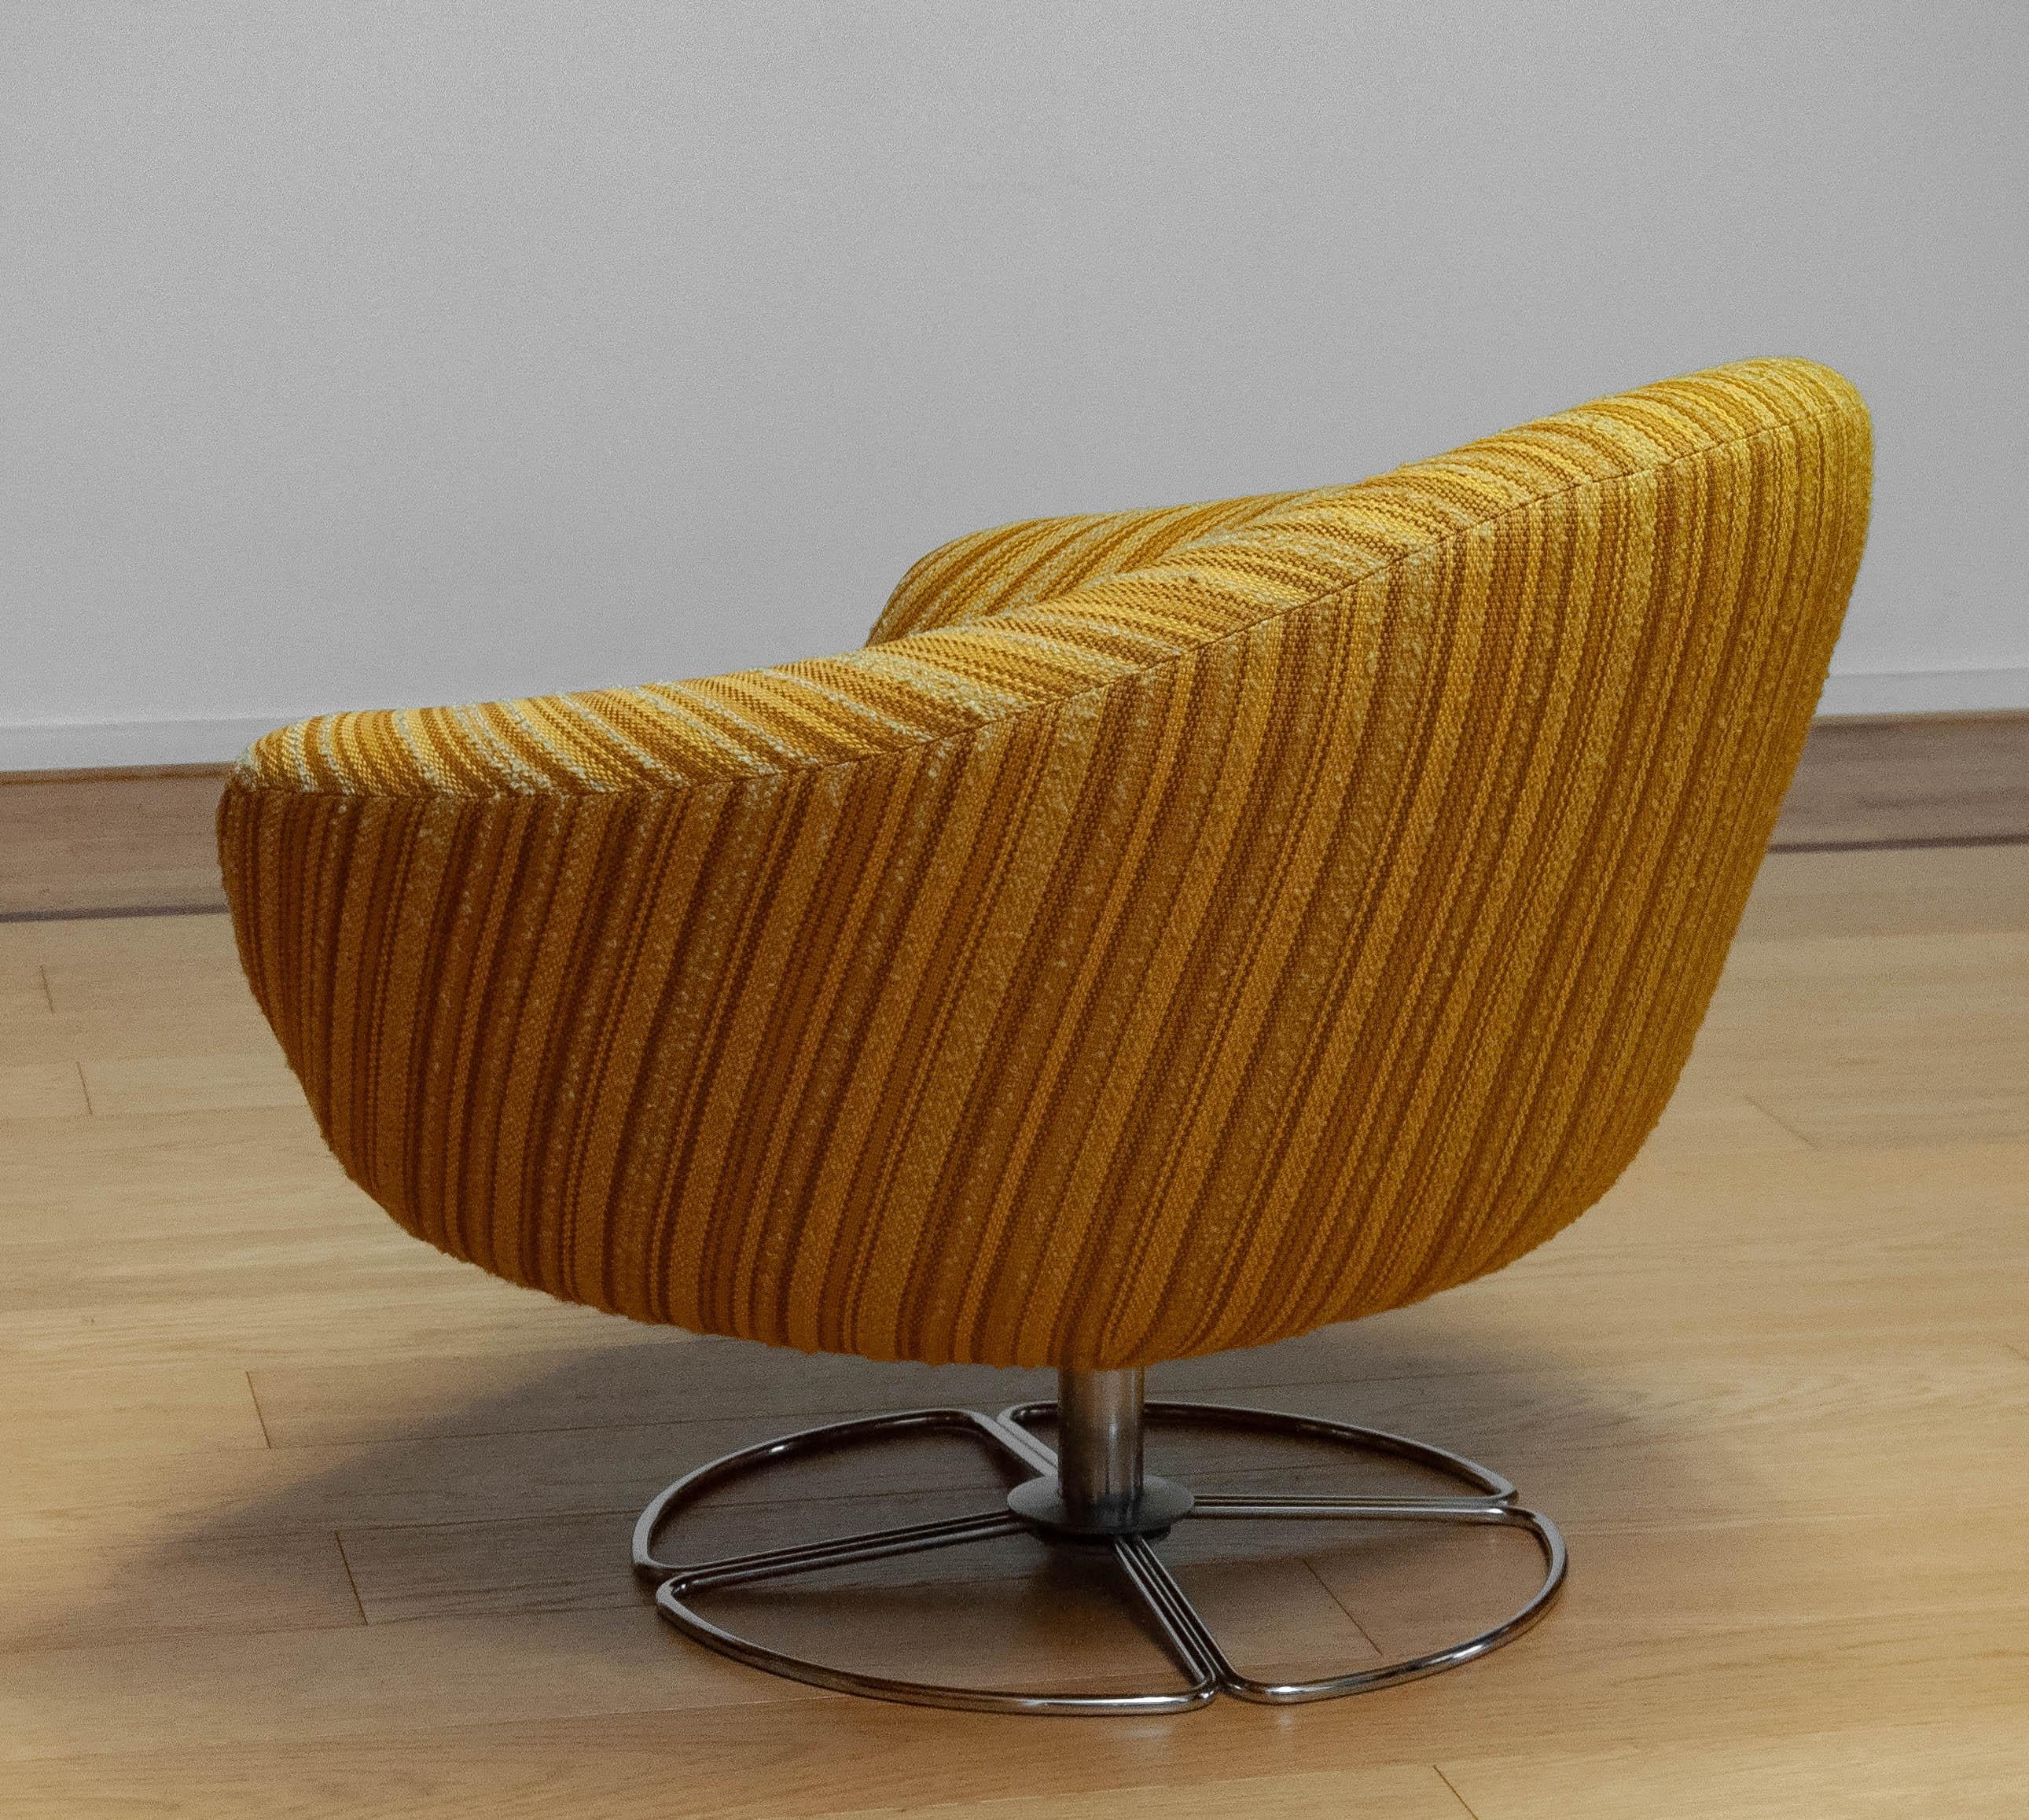 1960s Maize Yellow Bouclé Fabric Upholstered Swivel Chair By Dux Of Sweden For Sale 2